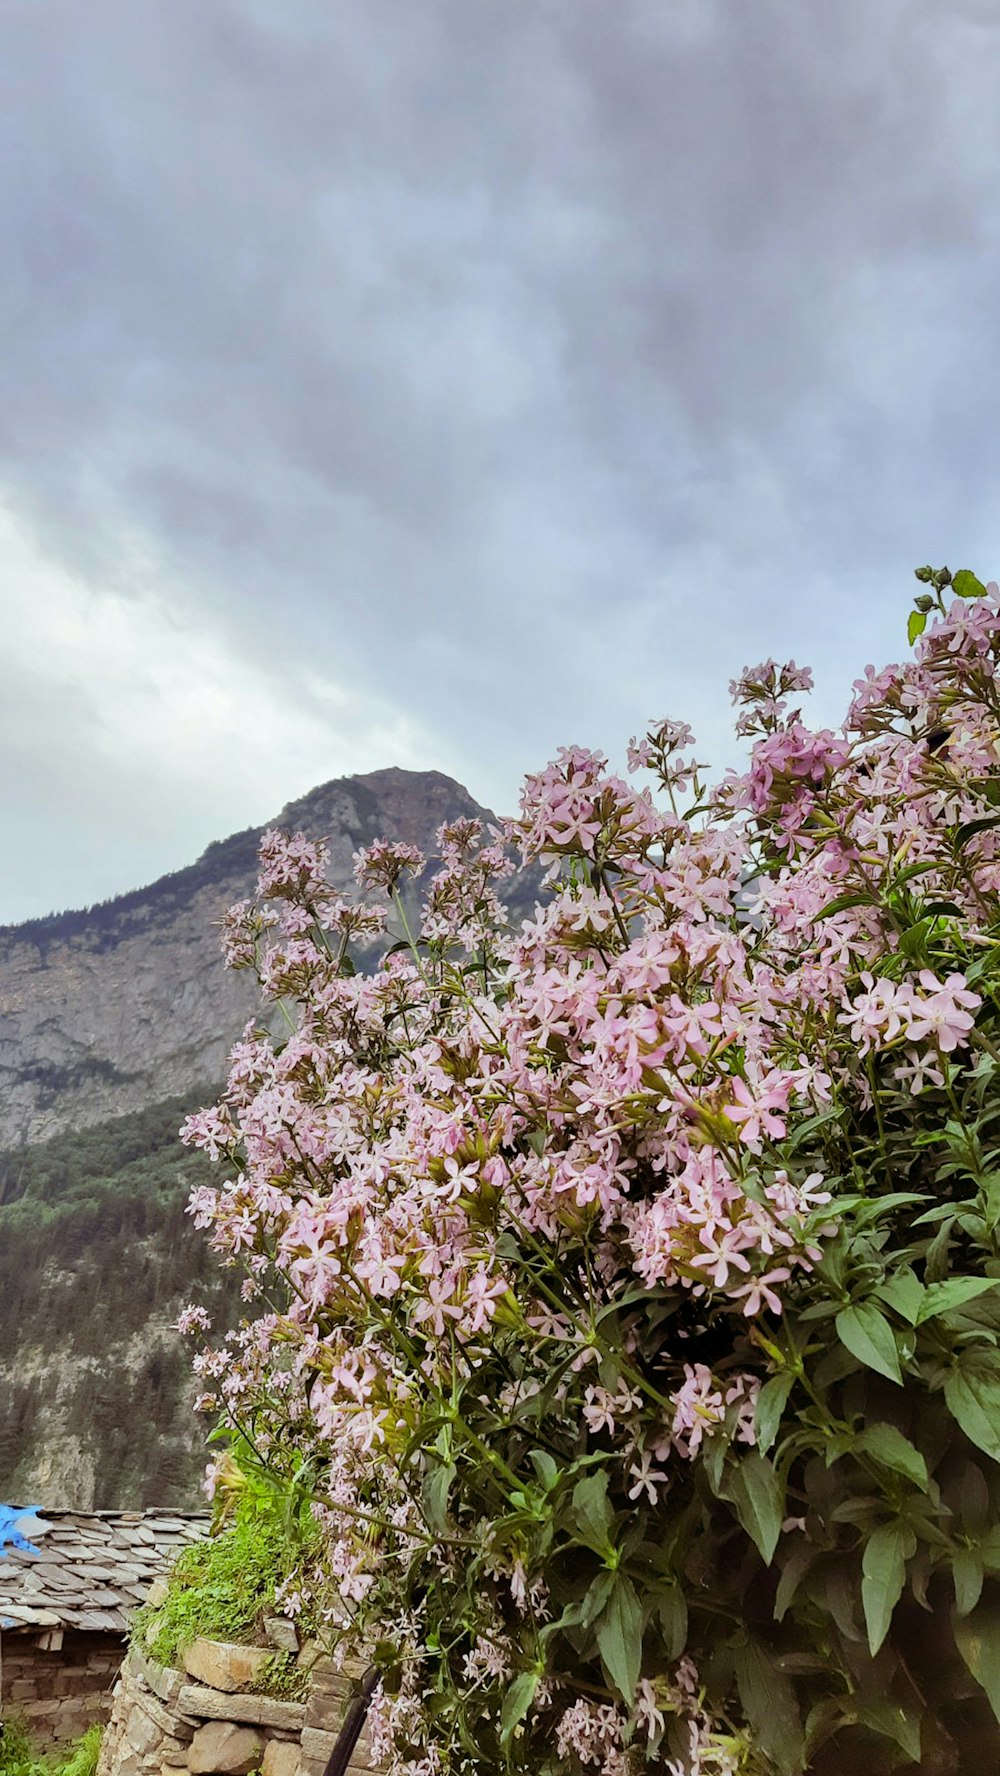 a bush with purple flowers in the foreground and a mountain in the background